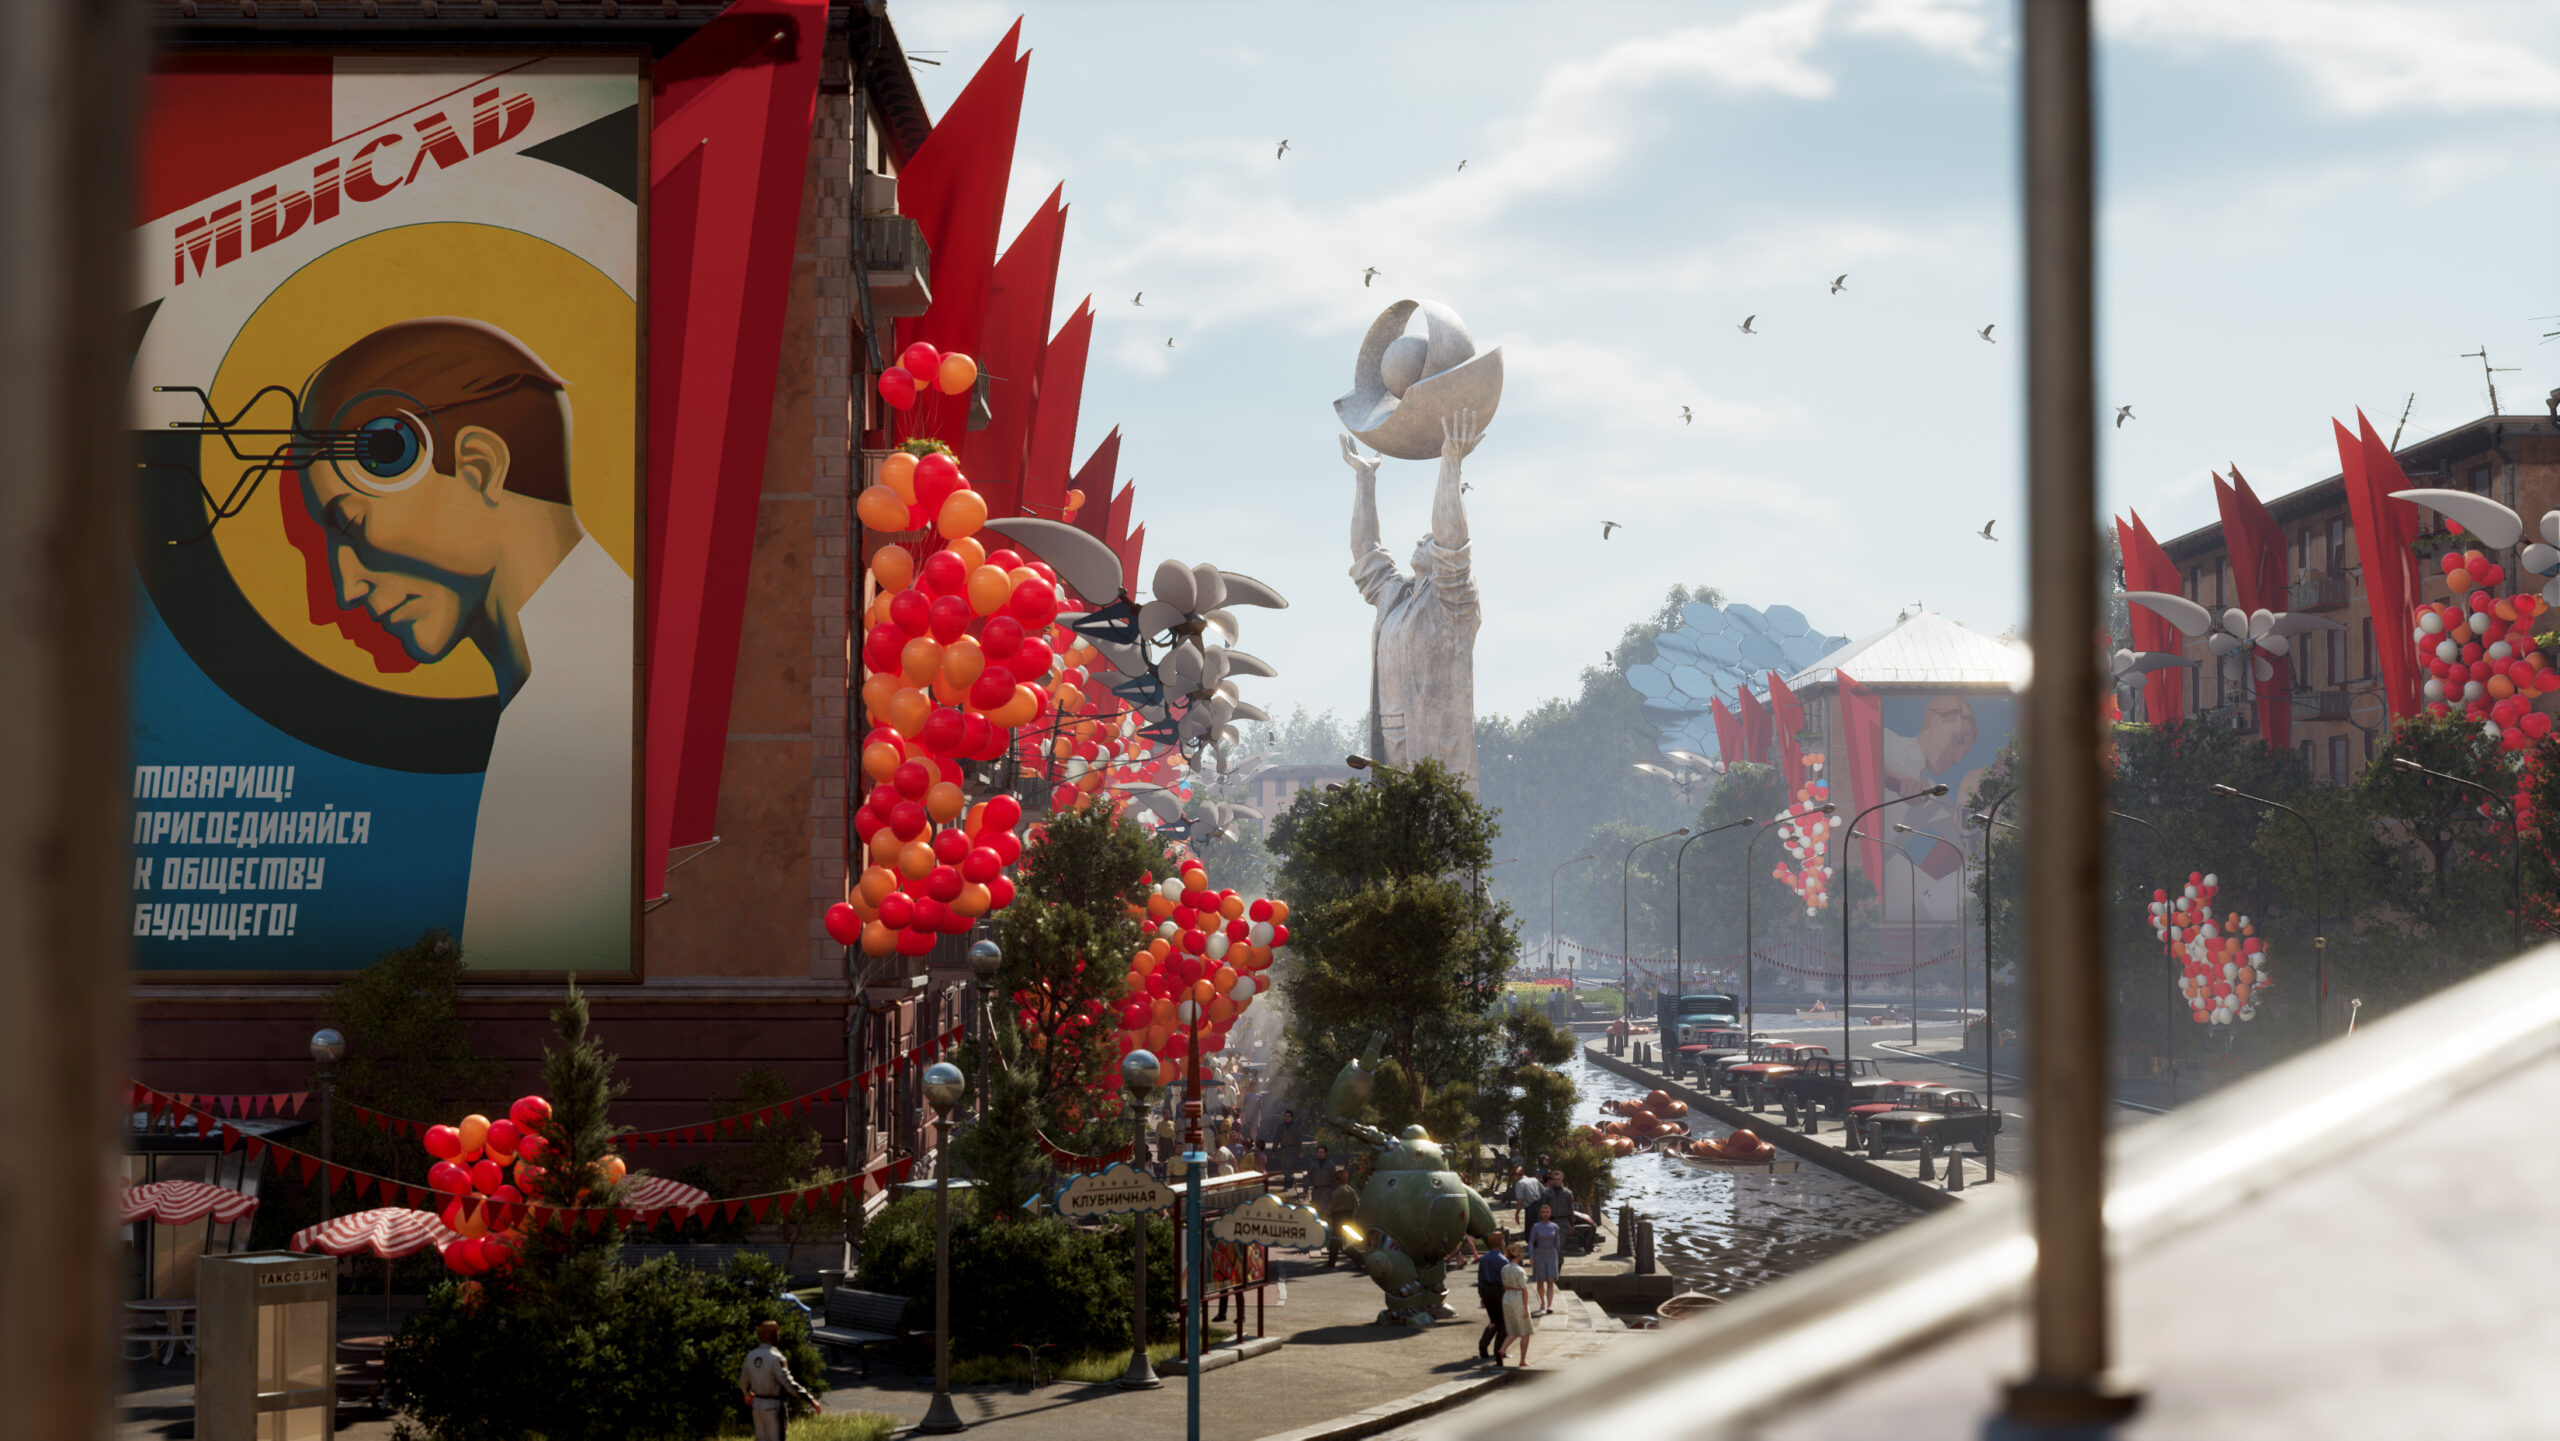 The Chelomey Complex celebrates the launch of new technology, with the streets decorated with balloons. A poster advertising the new THOUGHT device and a statue can also be seen via Atomic Heart (2023), Focus Entertainment